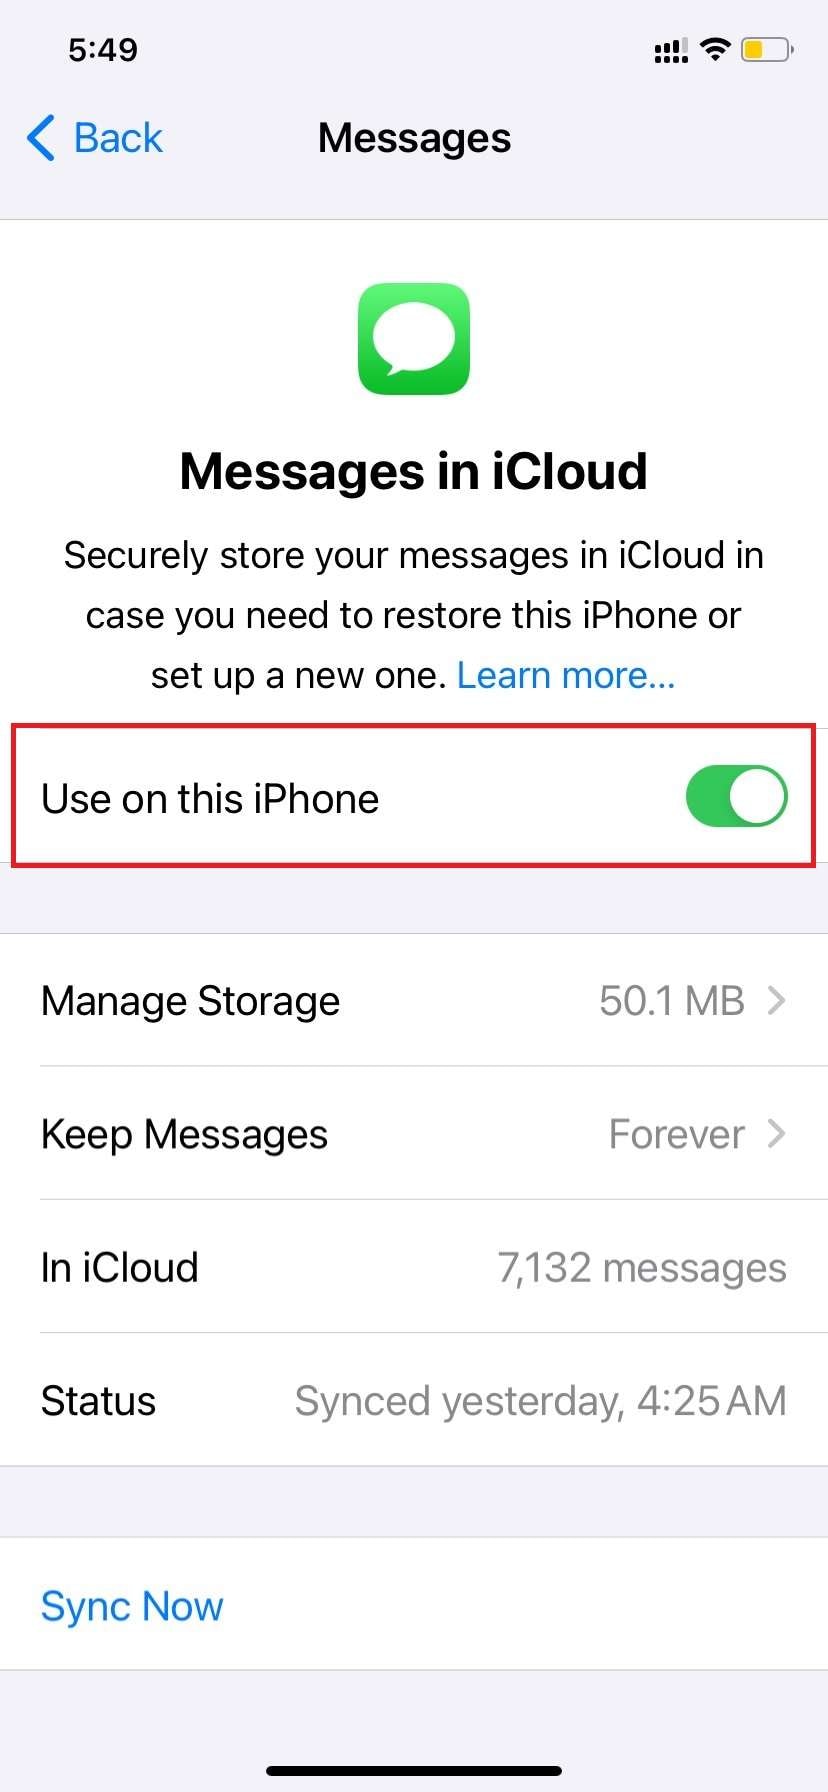 Check if the Use on this iPhone is enabled.